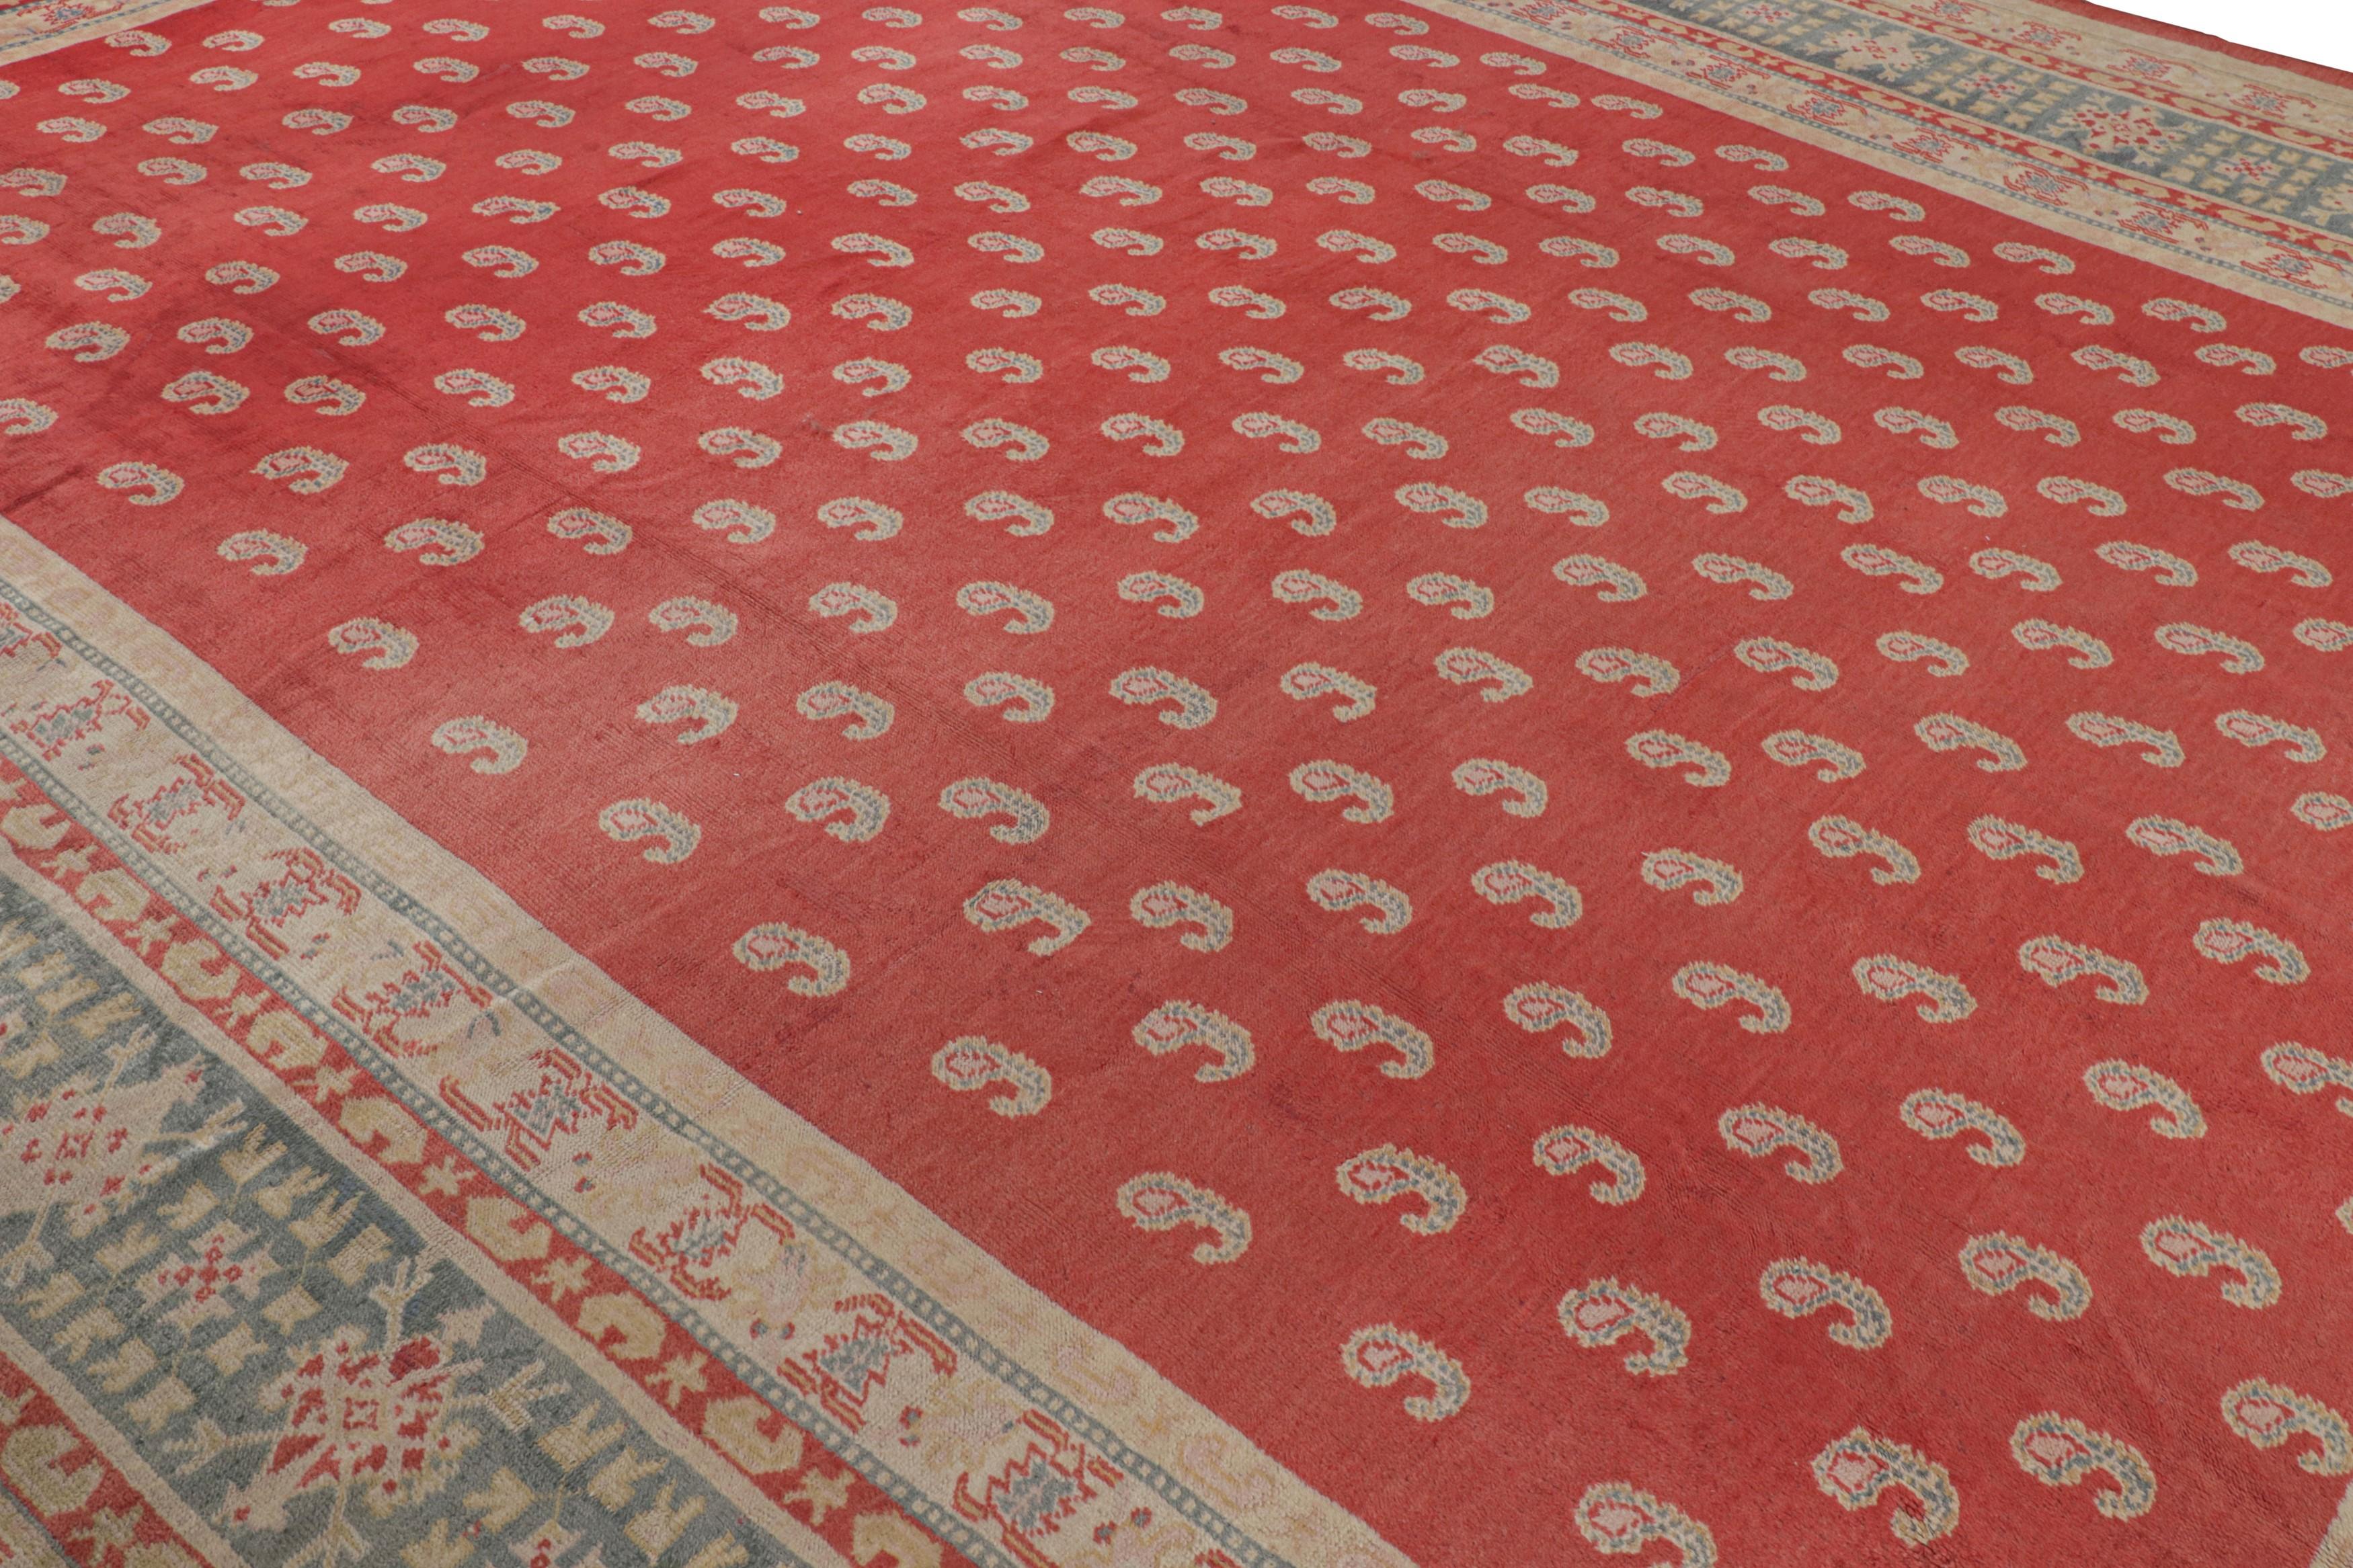 Hand-Knotted Antique Oushak Rug in Red with Paisley Patterns, from Rug & Kilim For Sale